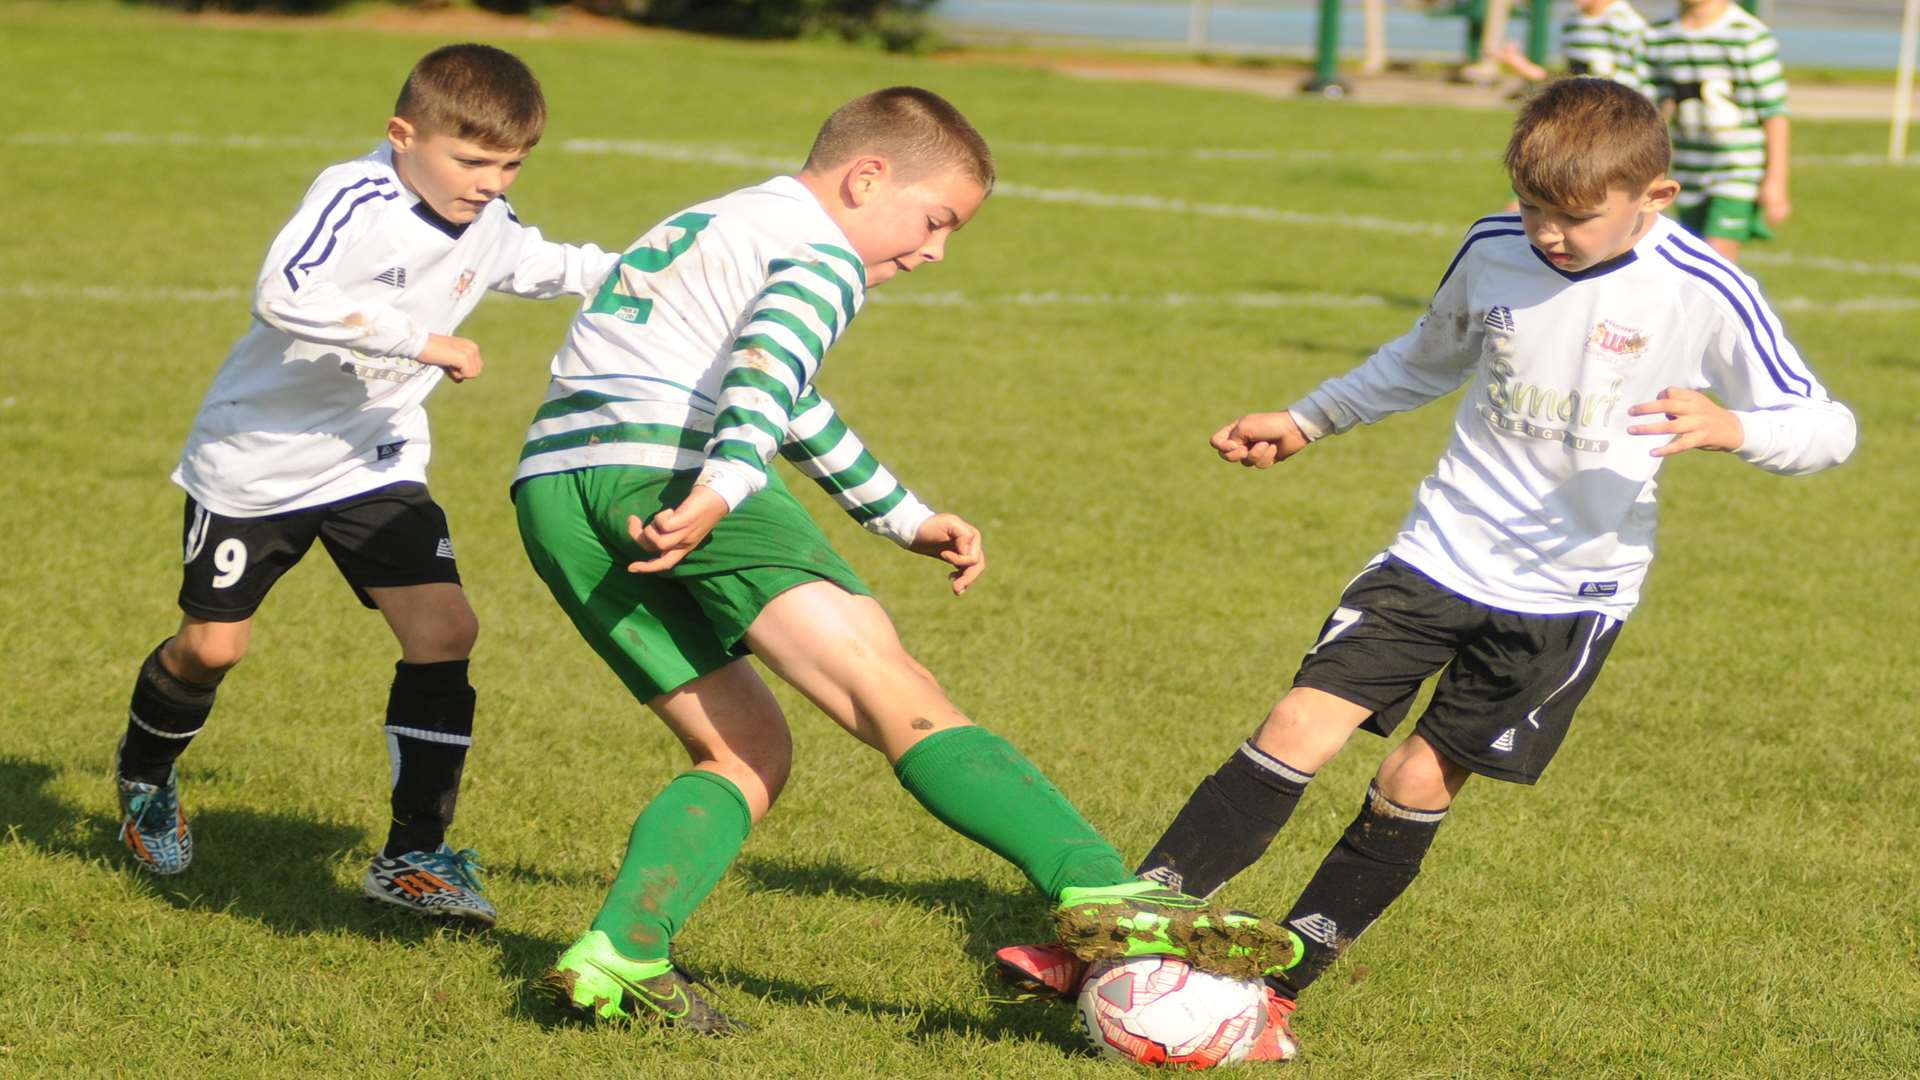 Woodcoombe under-10s, black and white, are two versus one against New Ash Green Picture: Steve Crispe